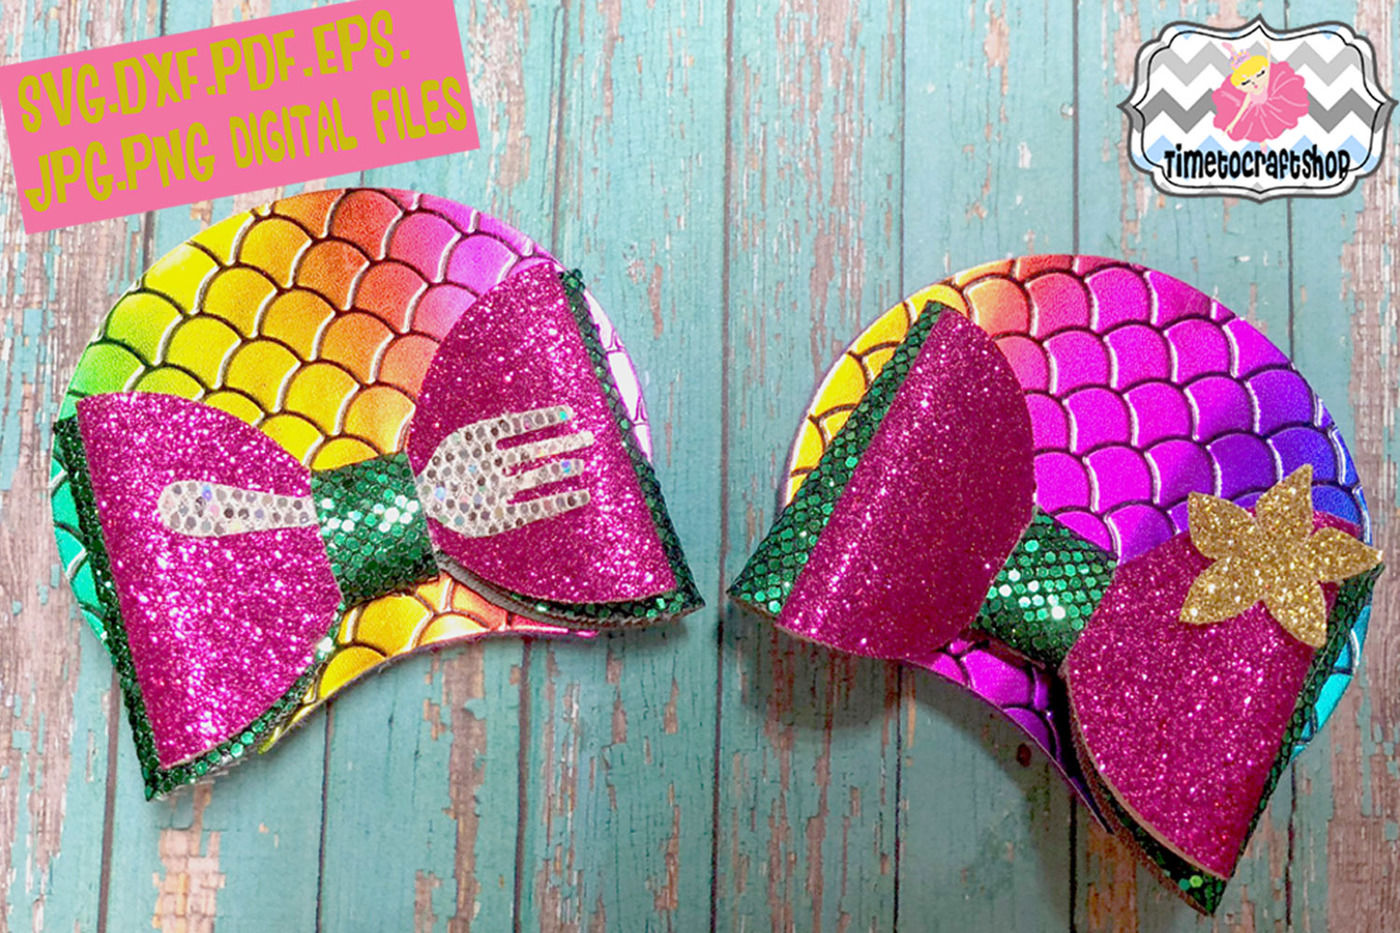 Mermaid Princess Ariel Inspired Mouse Ears Hair Bow Template By Timetocraftshop Thehungryjpeg Com